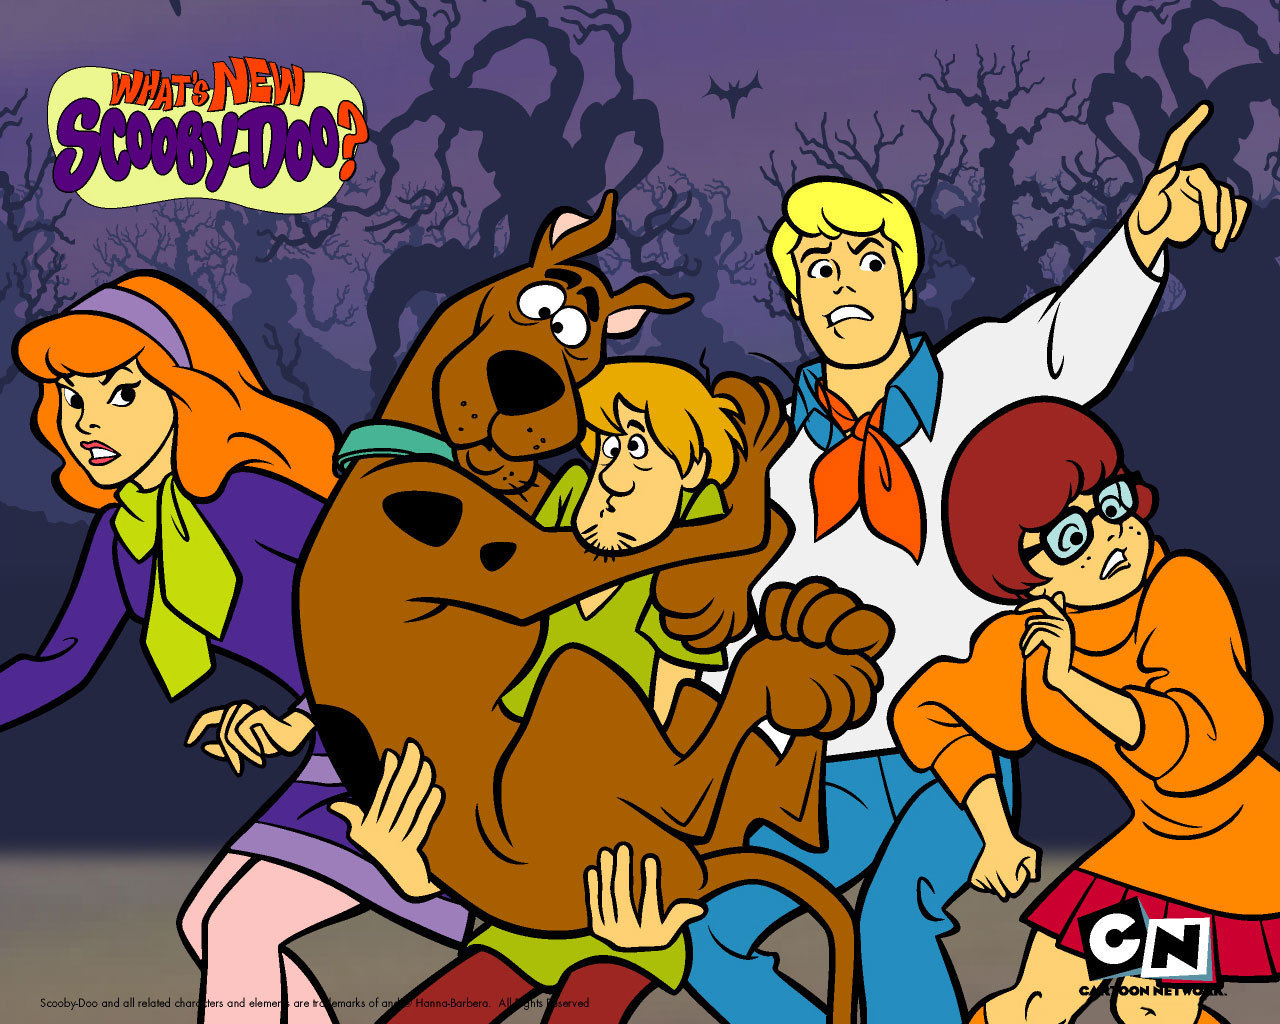 http://images2.fanpop.com/images/photos/8100000/The-Gang-scooby-doo-the-mystery-begins-8128722-1280-1024.jpg